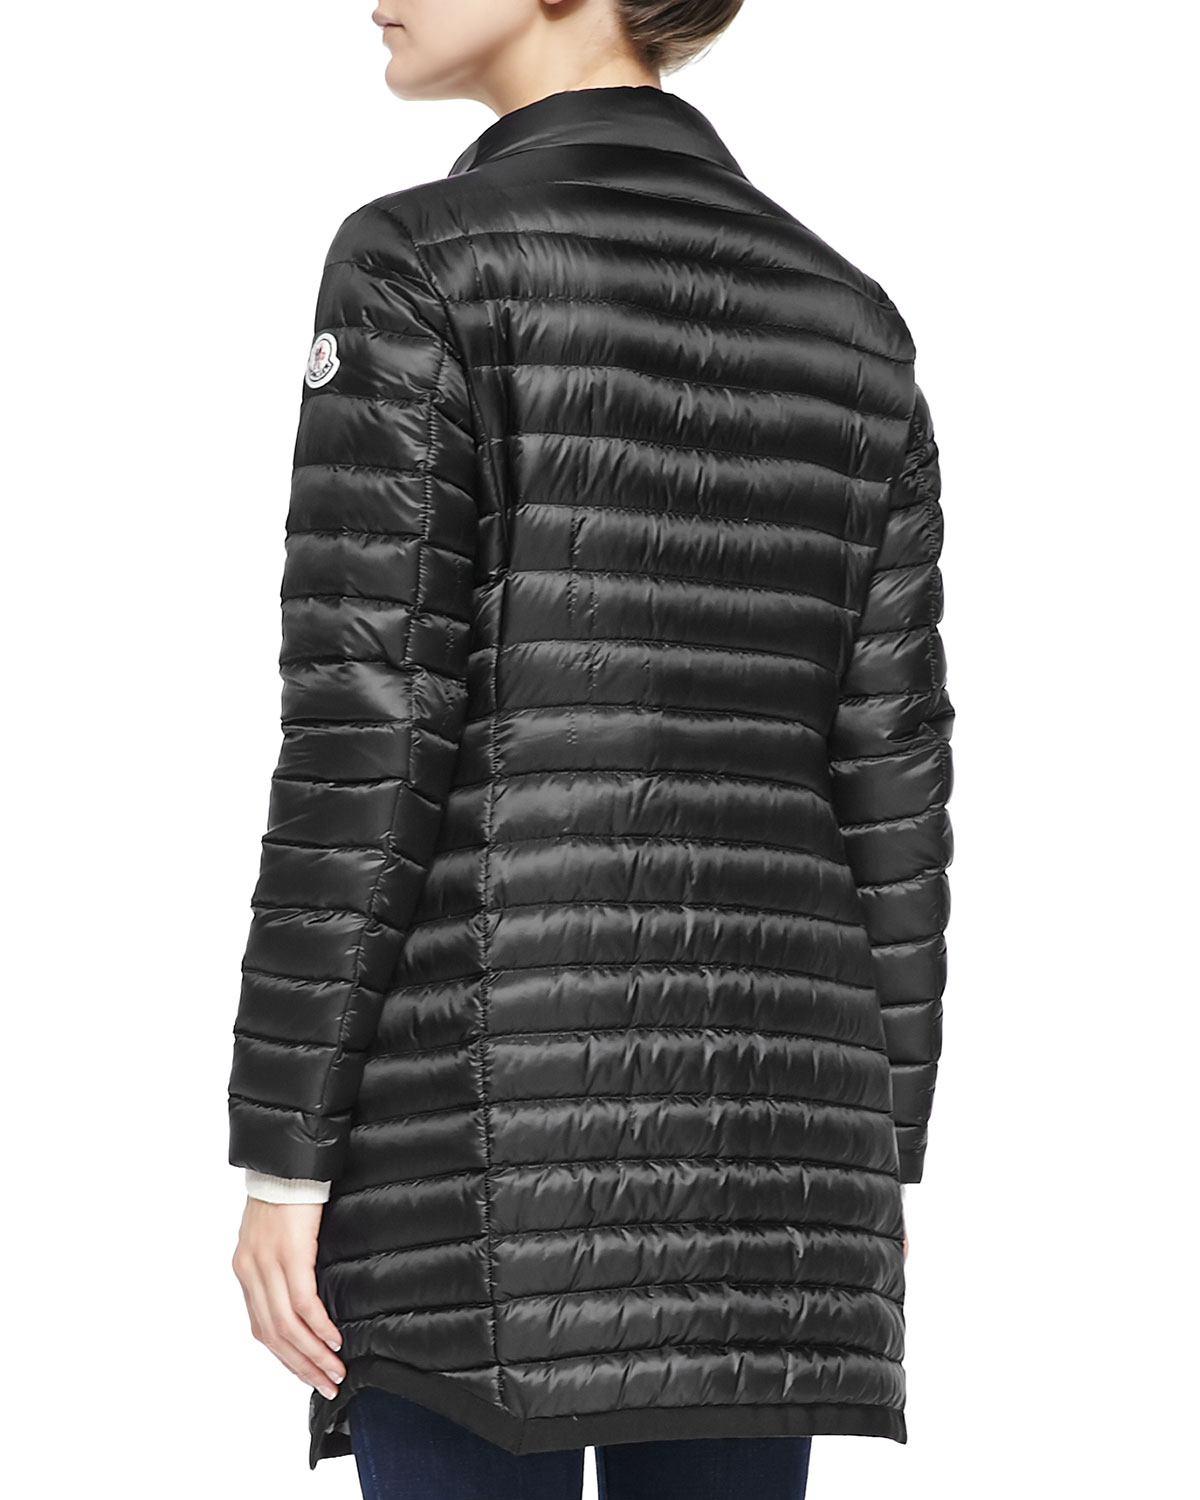 Moncler Synthetic Aubry Long Mock-neck Puffer Jacket in Black - Lyst